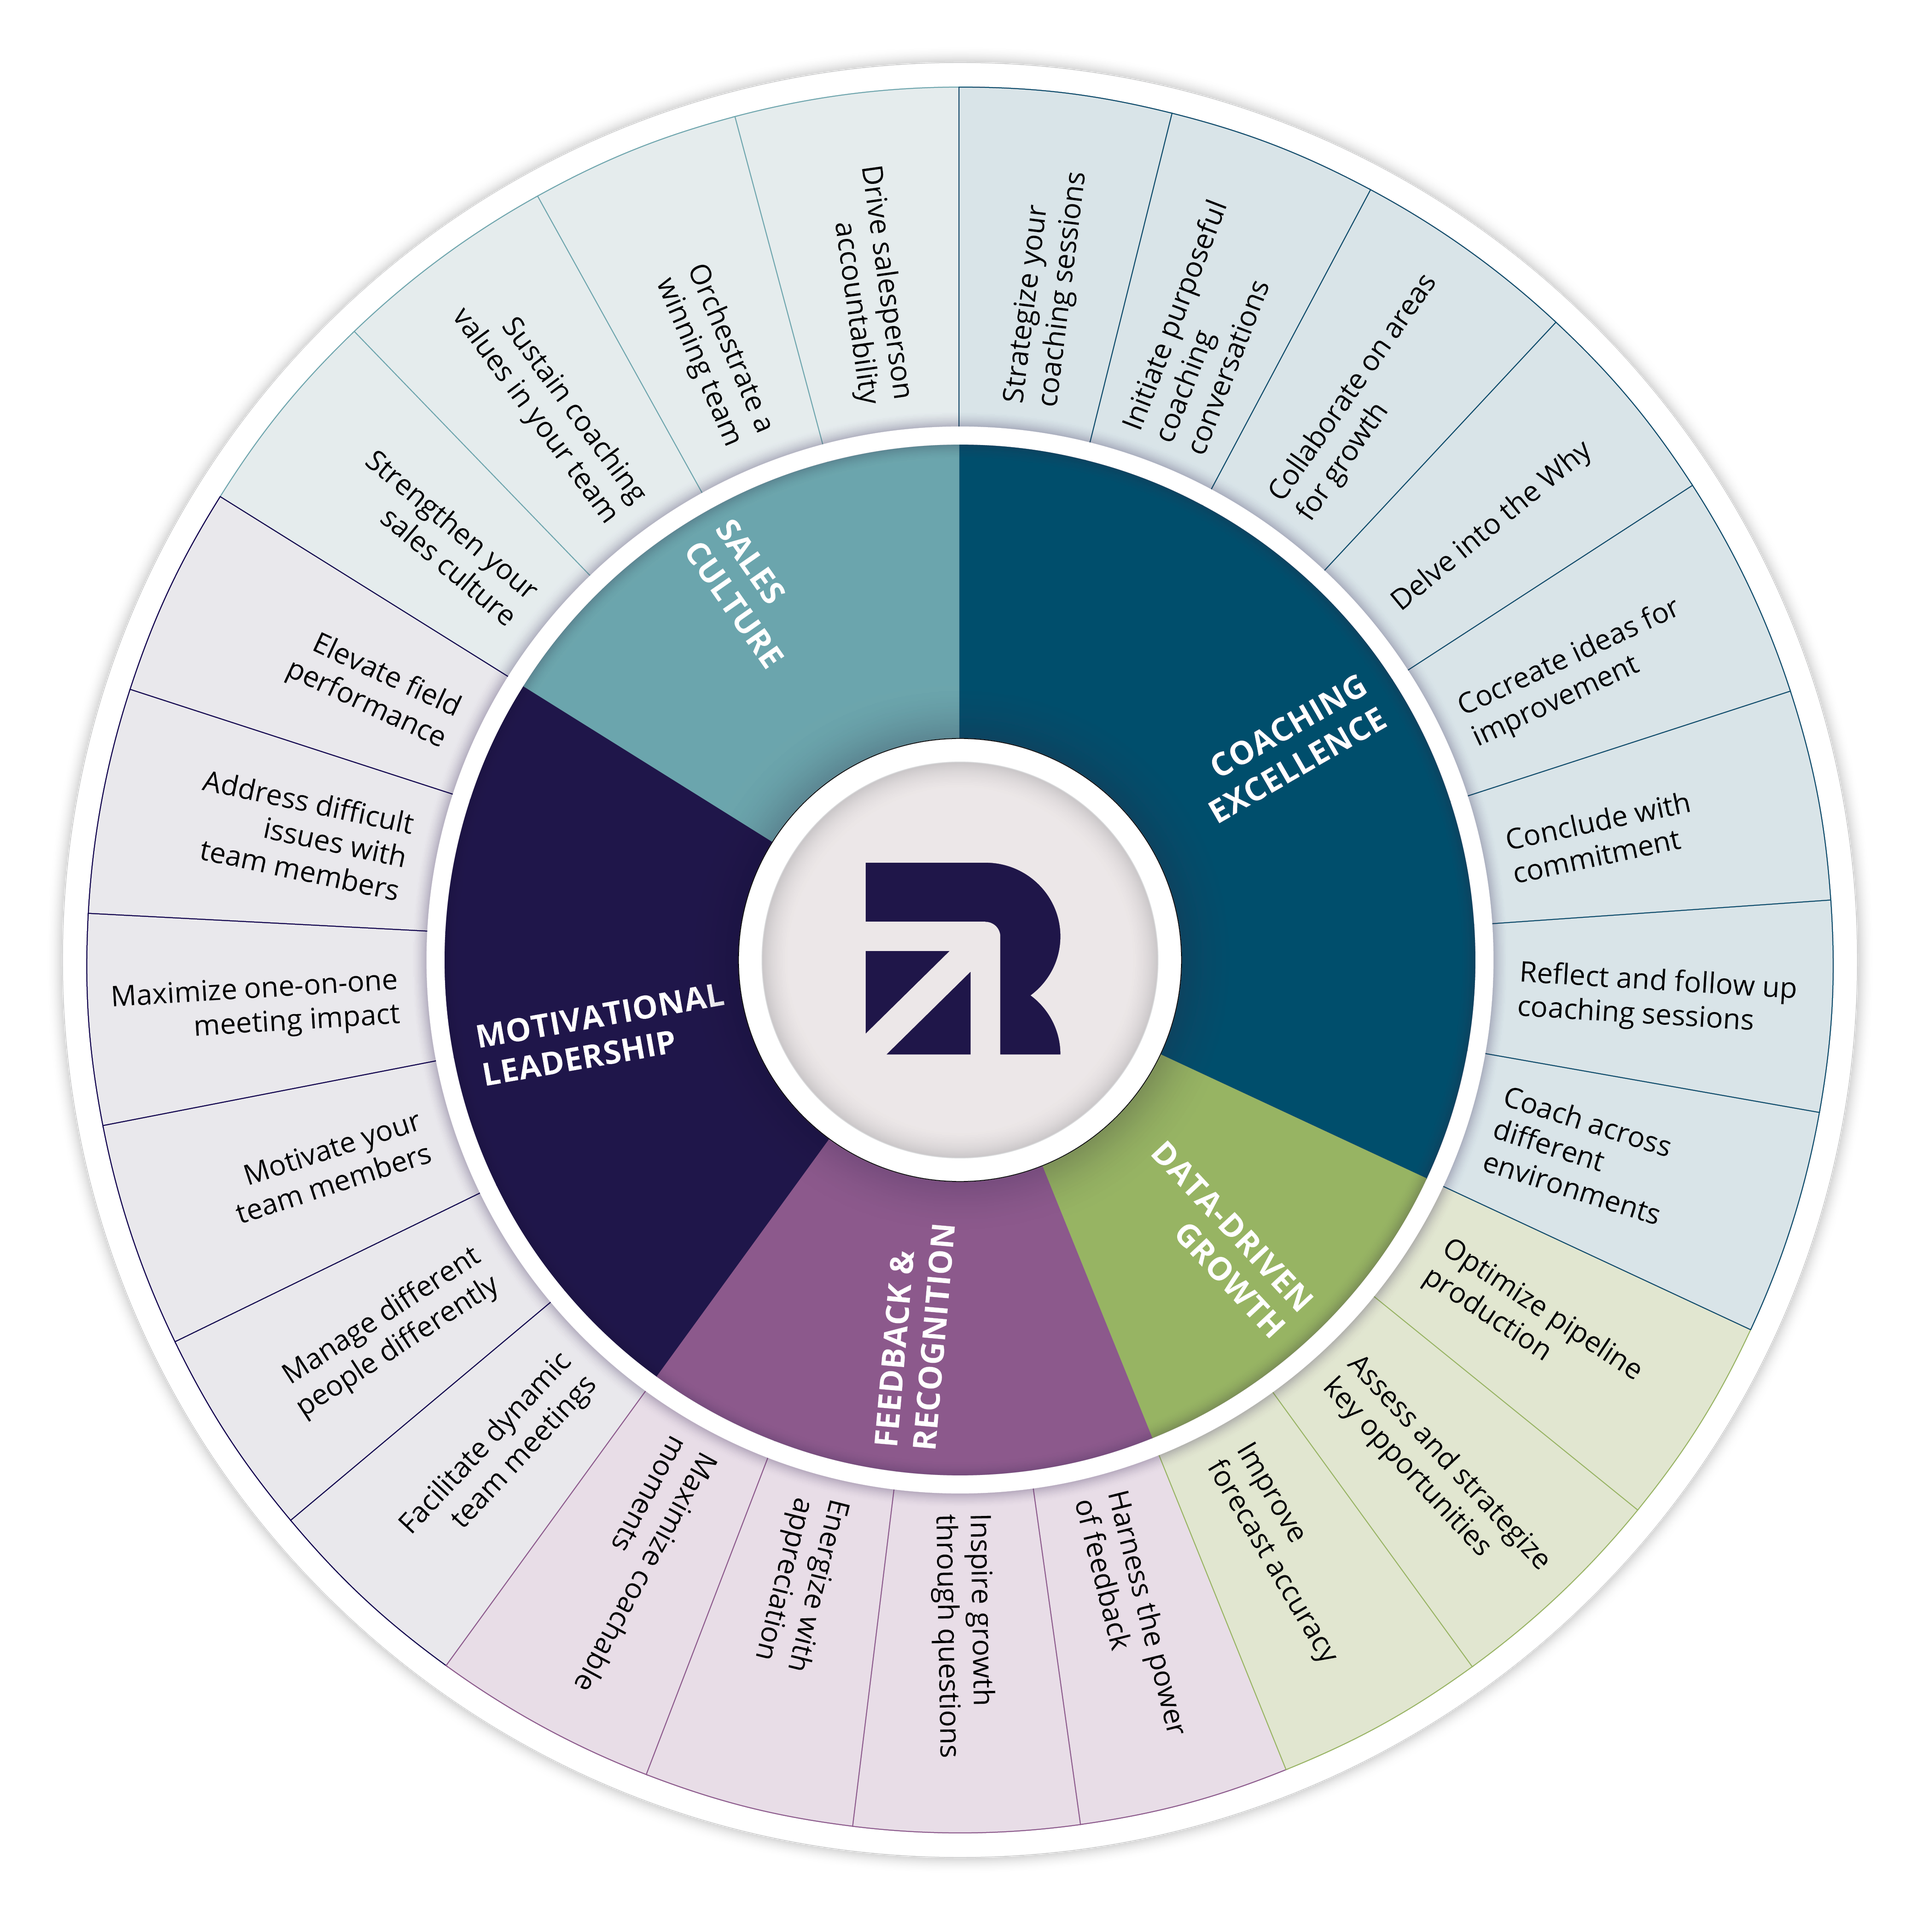 graphic showing the sales management capabilities framework that maps out the 5 capabilities and 15 behaviors discussed in the following sections of this article.